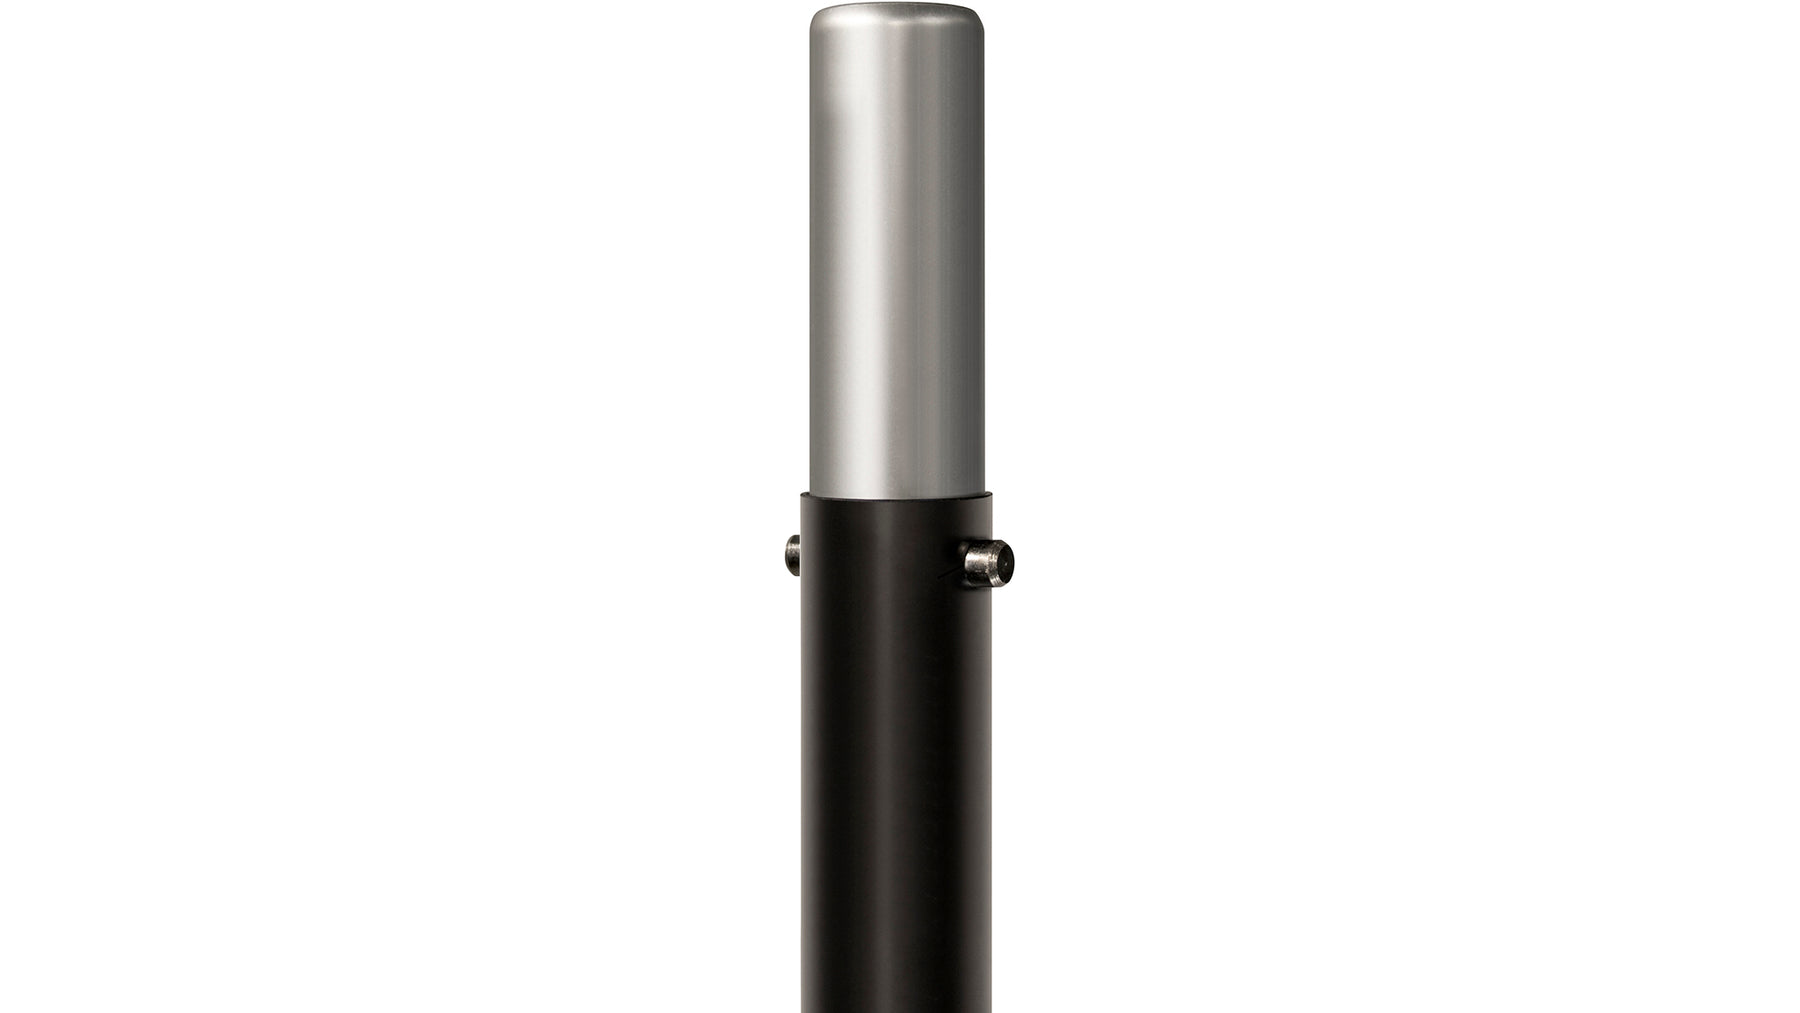 SP-80B Speaker Pole with M20 Threaded Connection and Standard Subwoofer Adapter